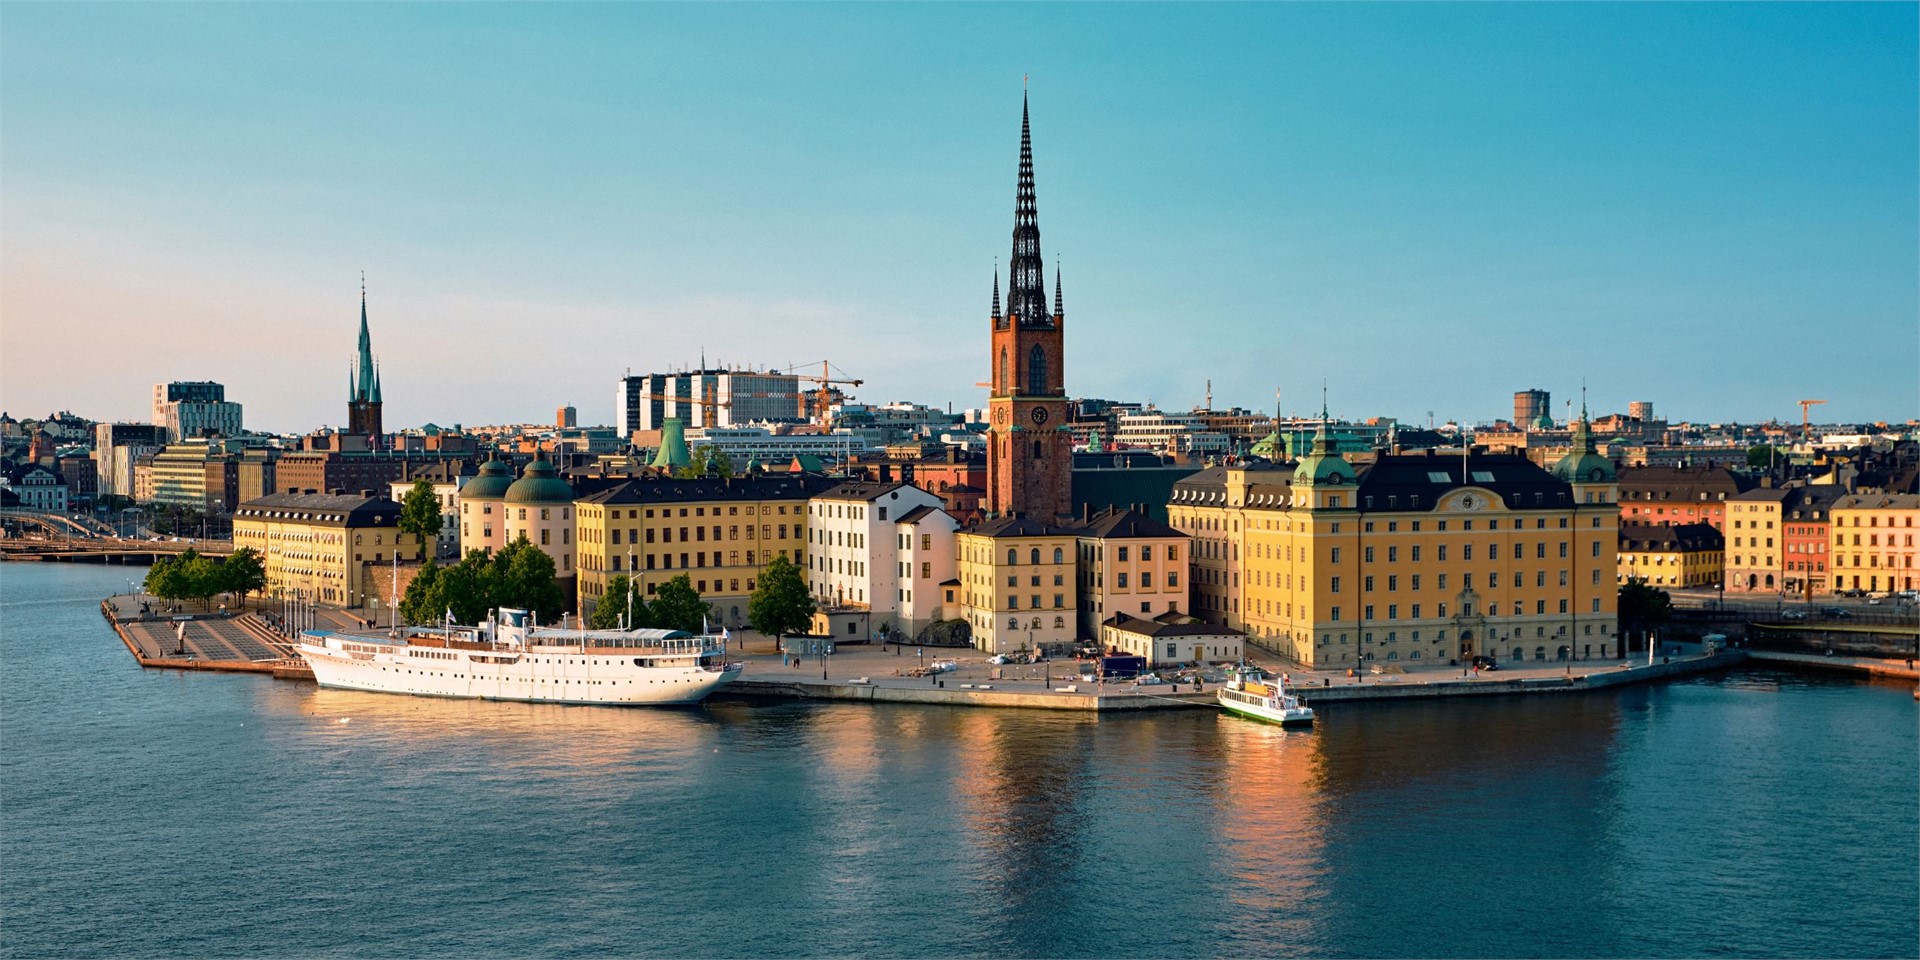 Hotels and accommodation in Stockholm, Sweden
